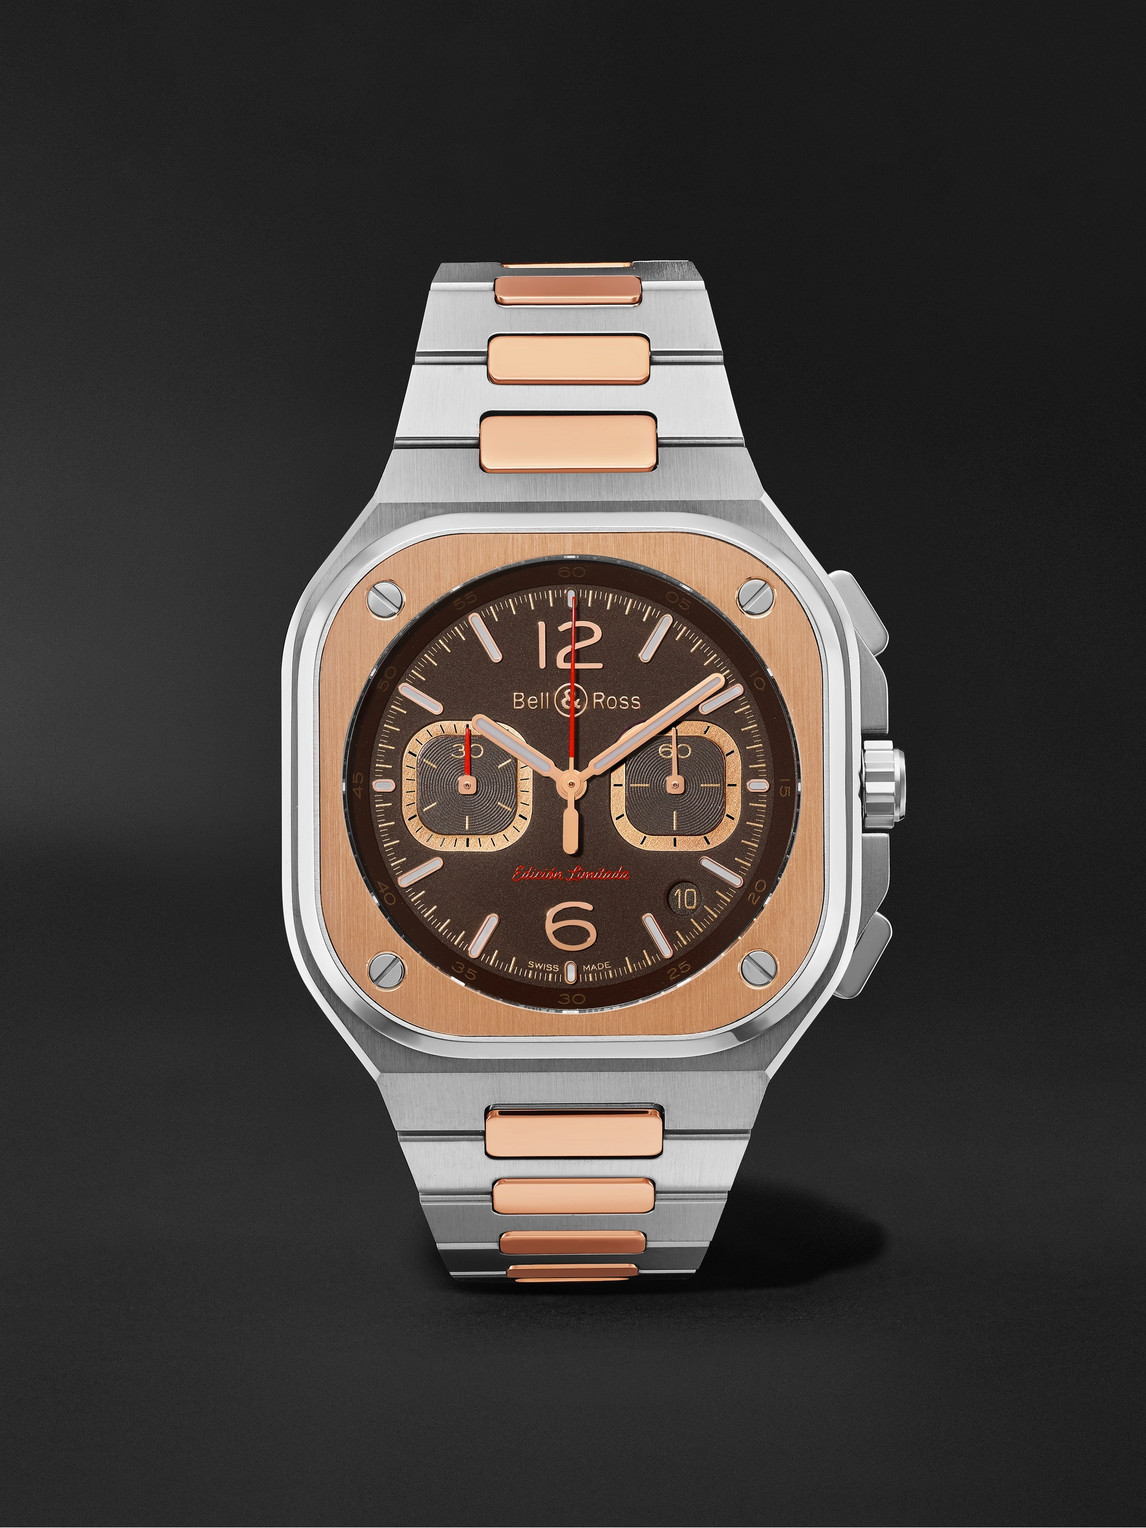 Bell & Ross Br 05 Limited Edition Automatic Chronograph 42mm Stainless Steel And Rose Gold Watch, Ref. No. Br05c In Brown